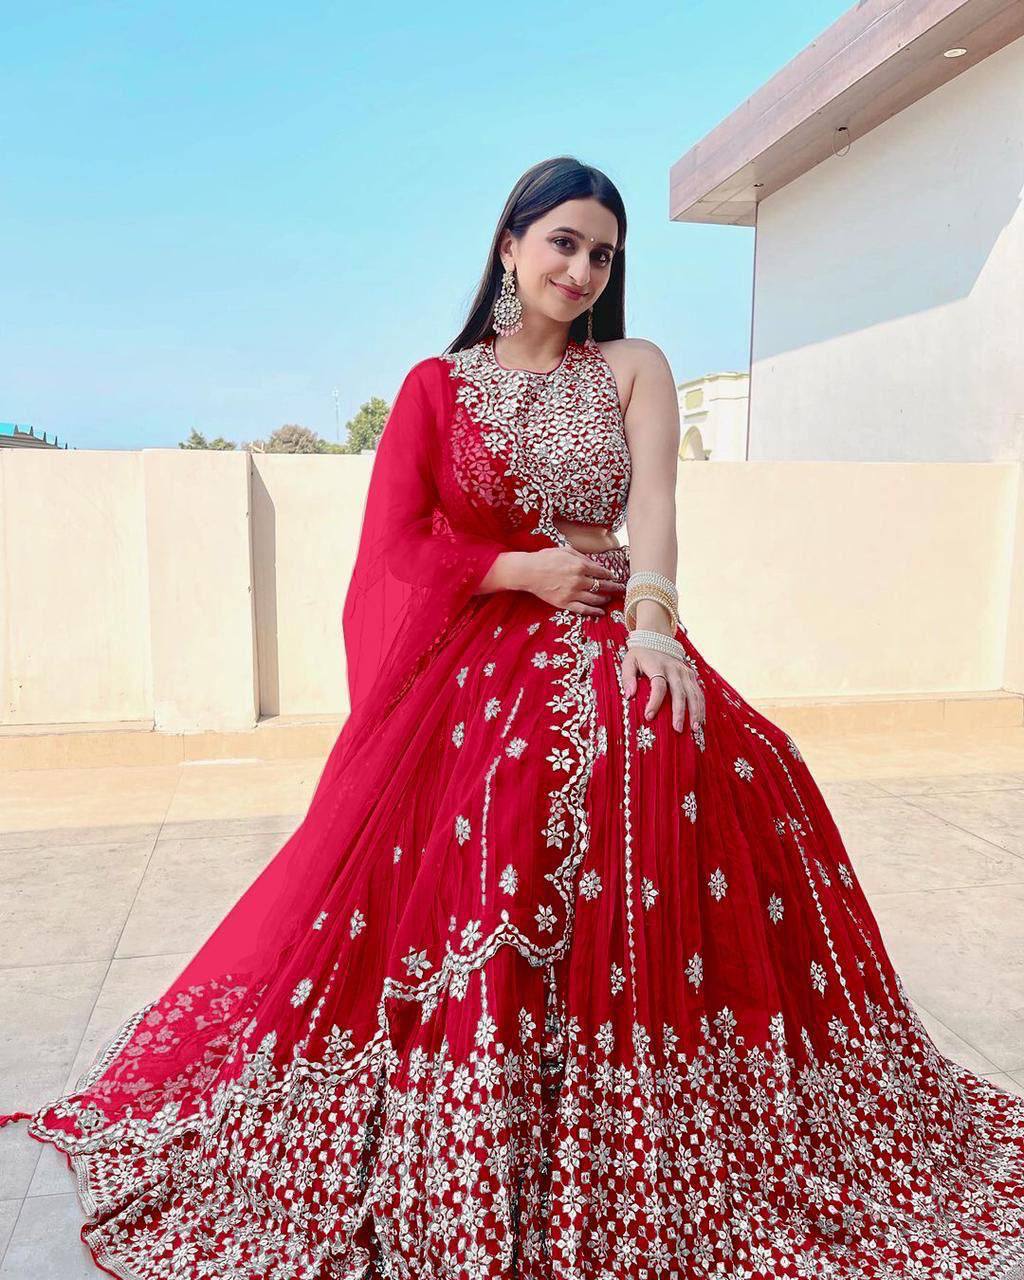 Designer Red Lehenga R20 in Siwan at best price by Abc Fashion - Justdial